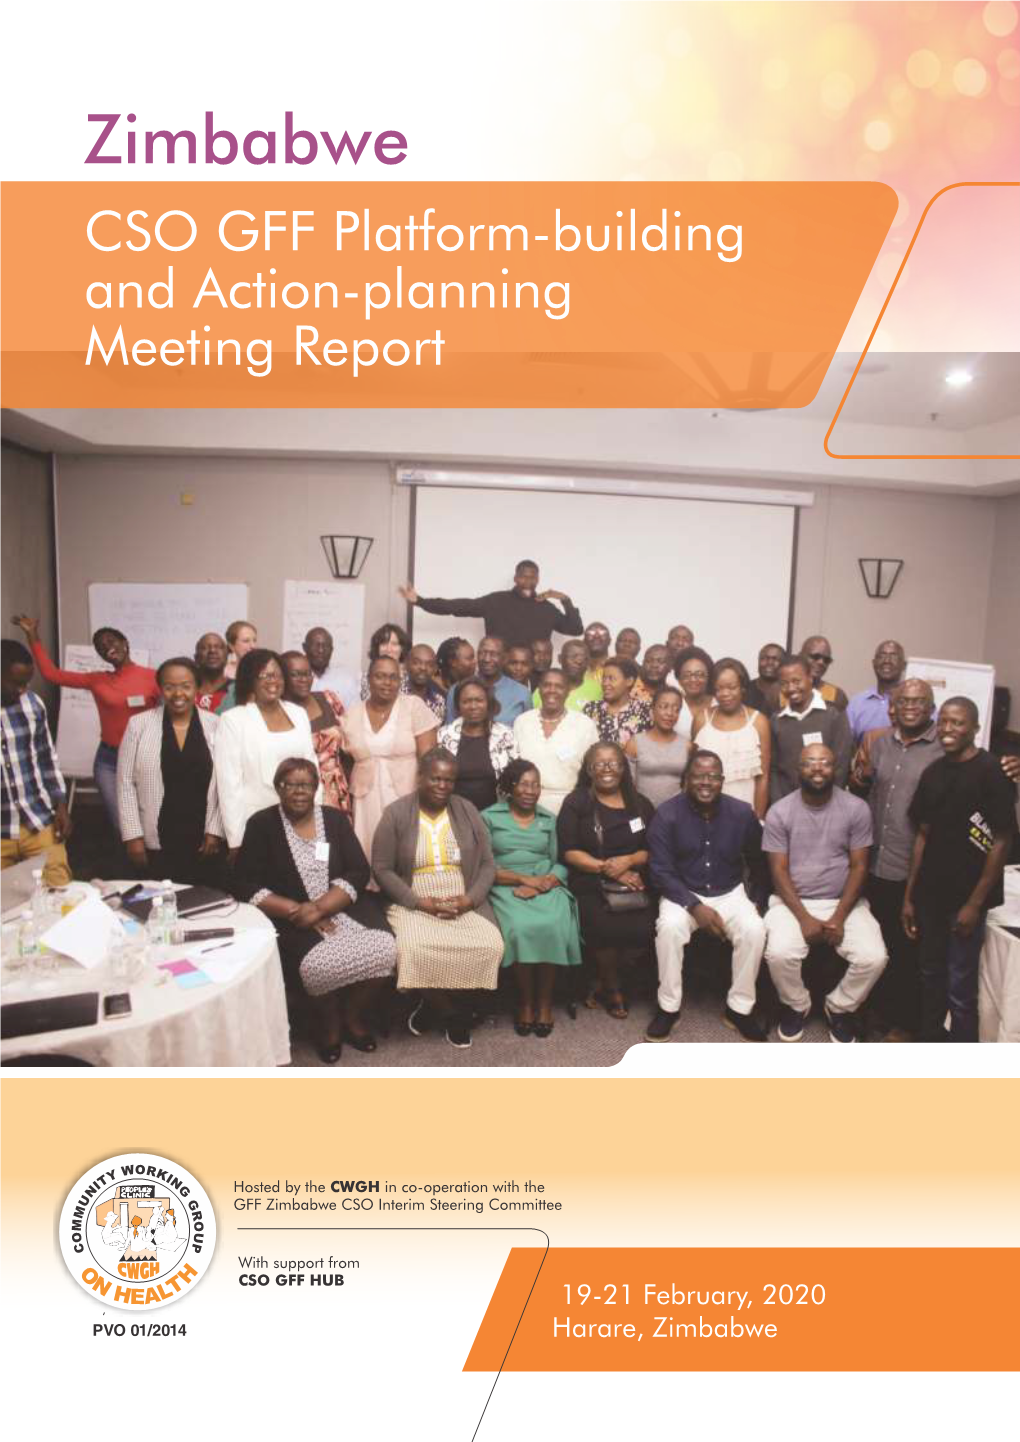 CSO GFF Platform-Building and Action-Planning Meeting Report